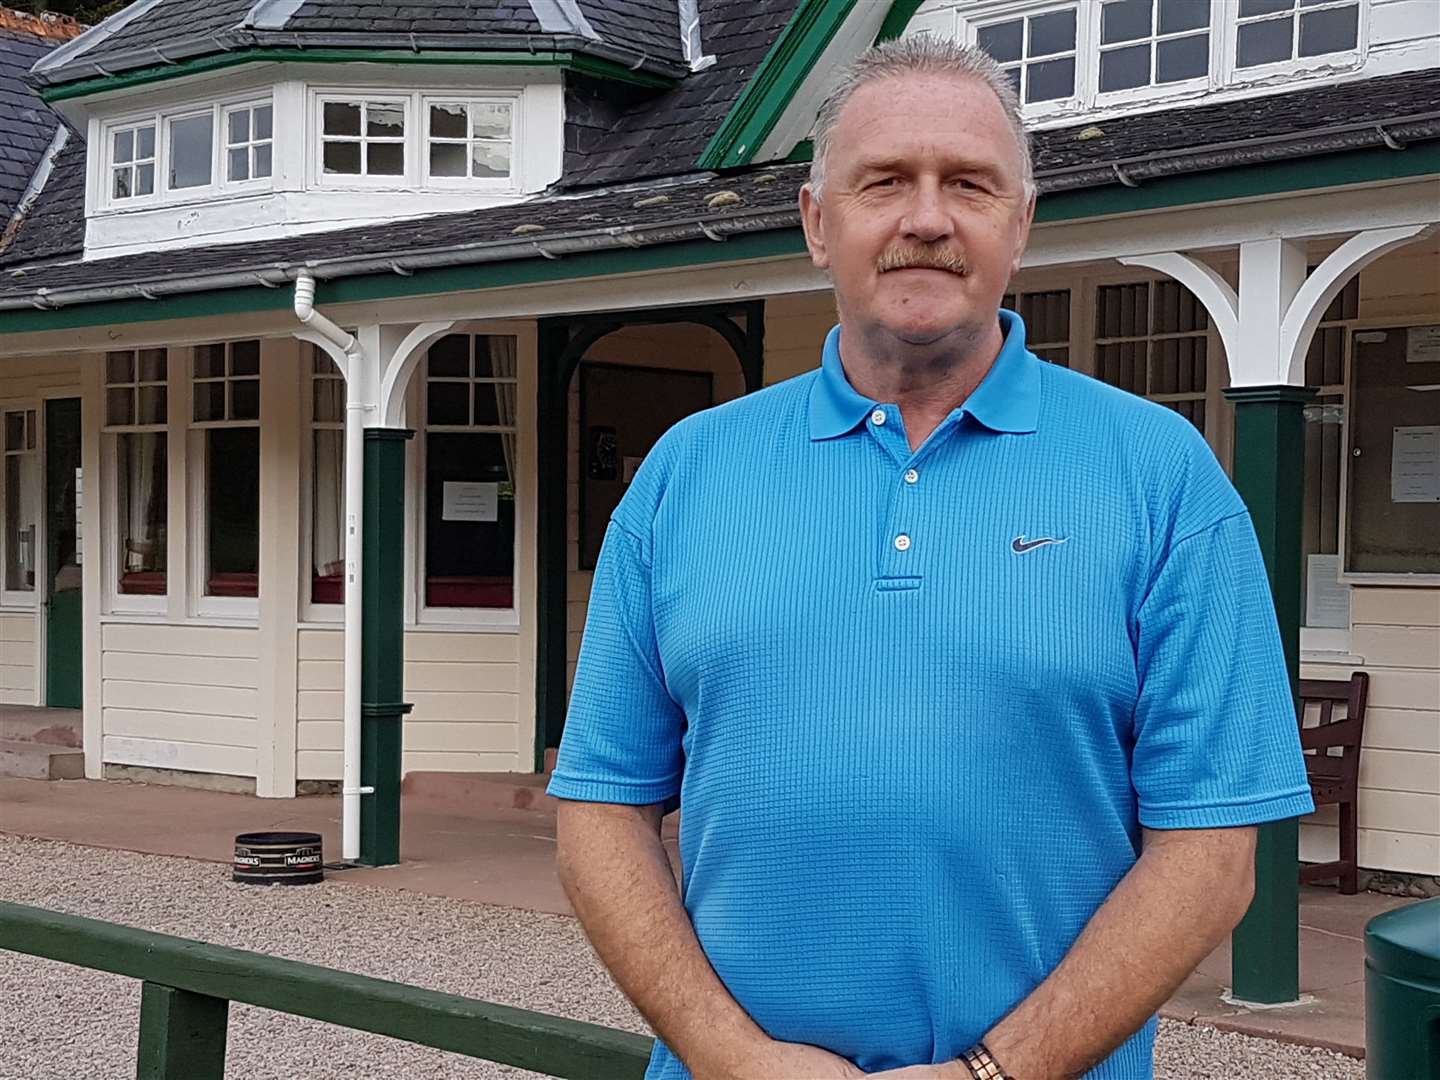 Kingussie Golf Club Keith Hunter outside of the course's historic clubhouse.